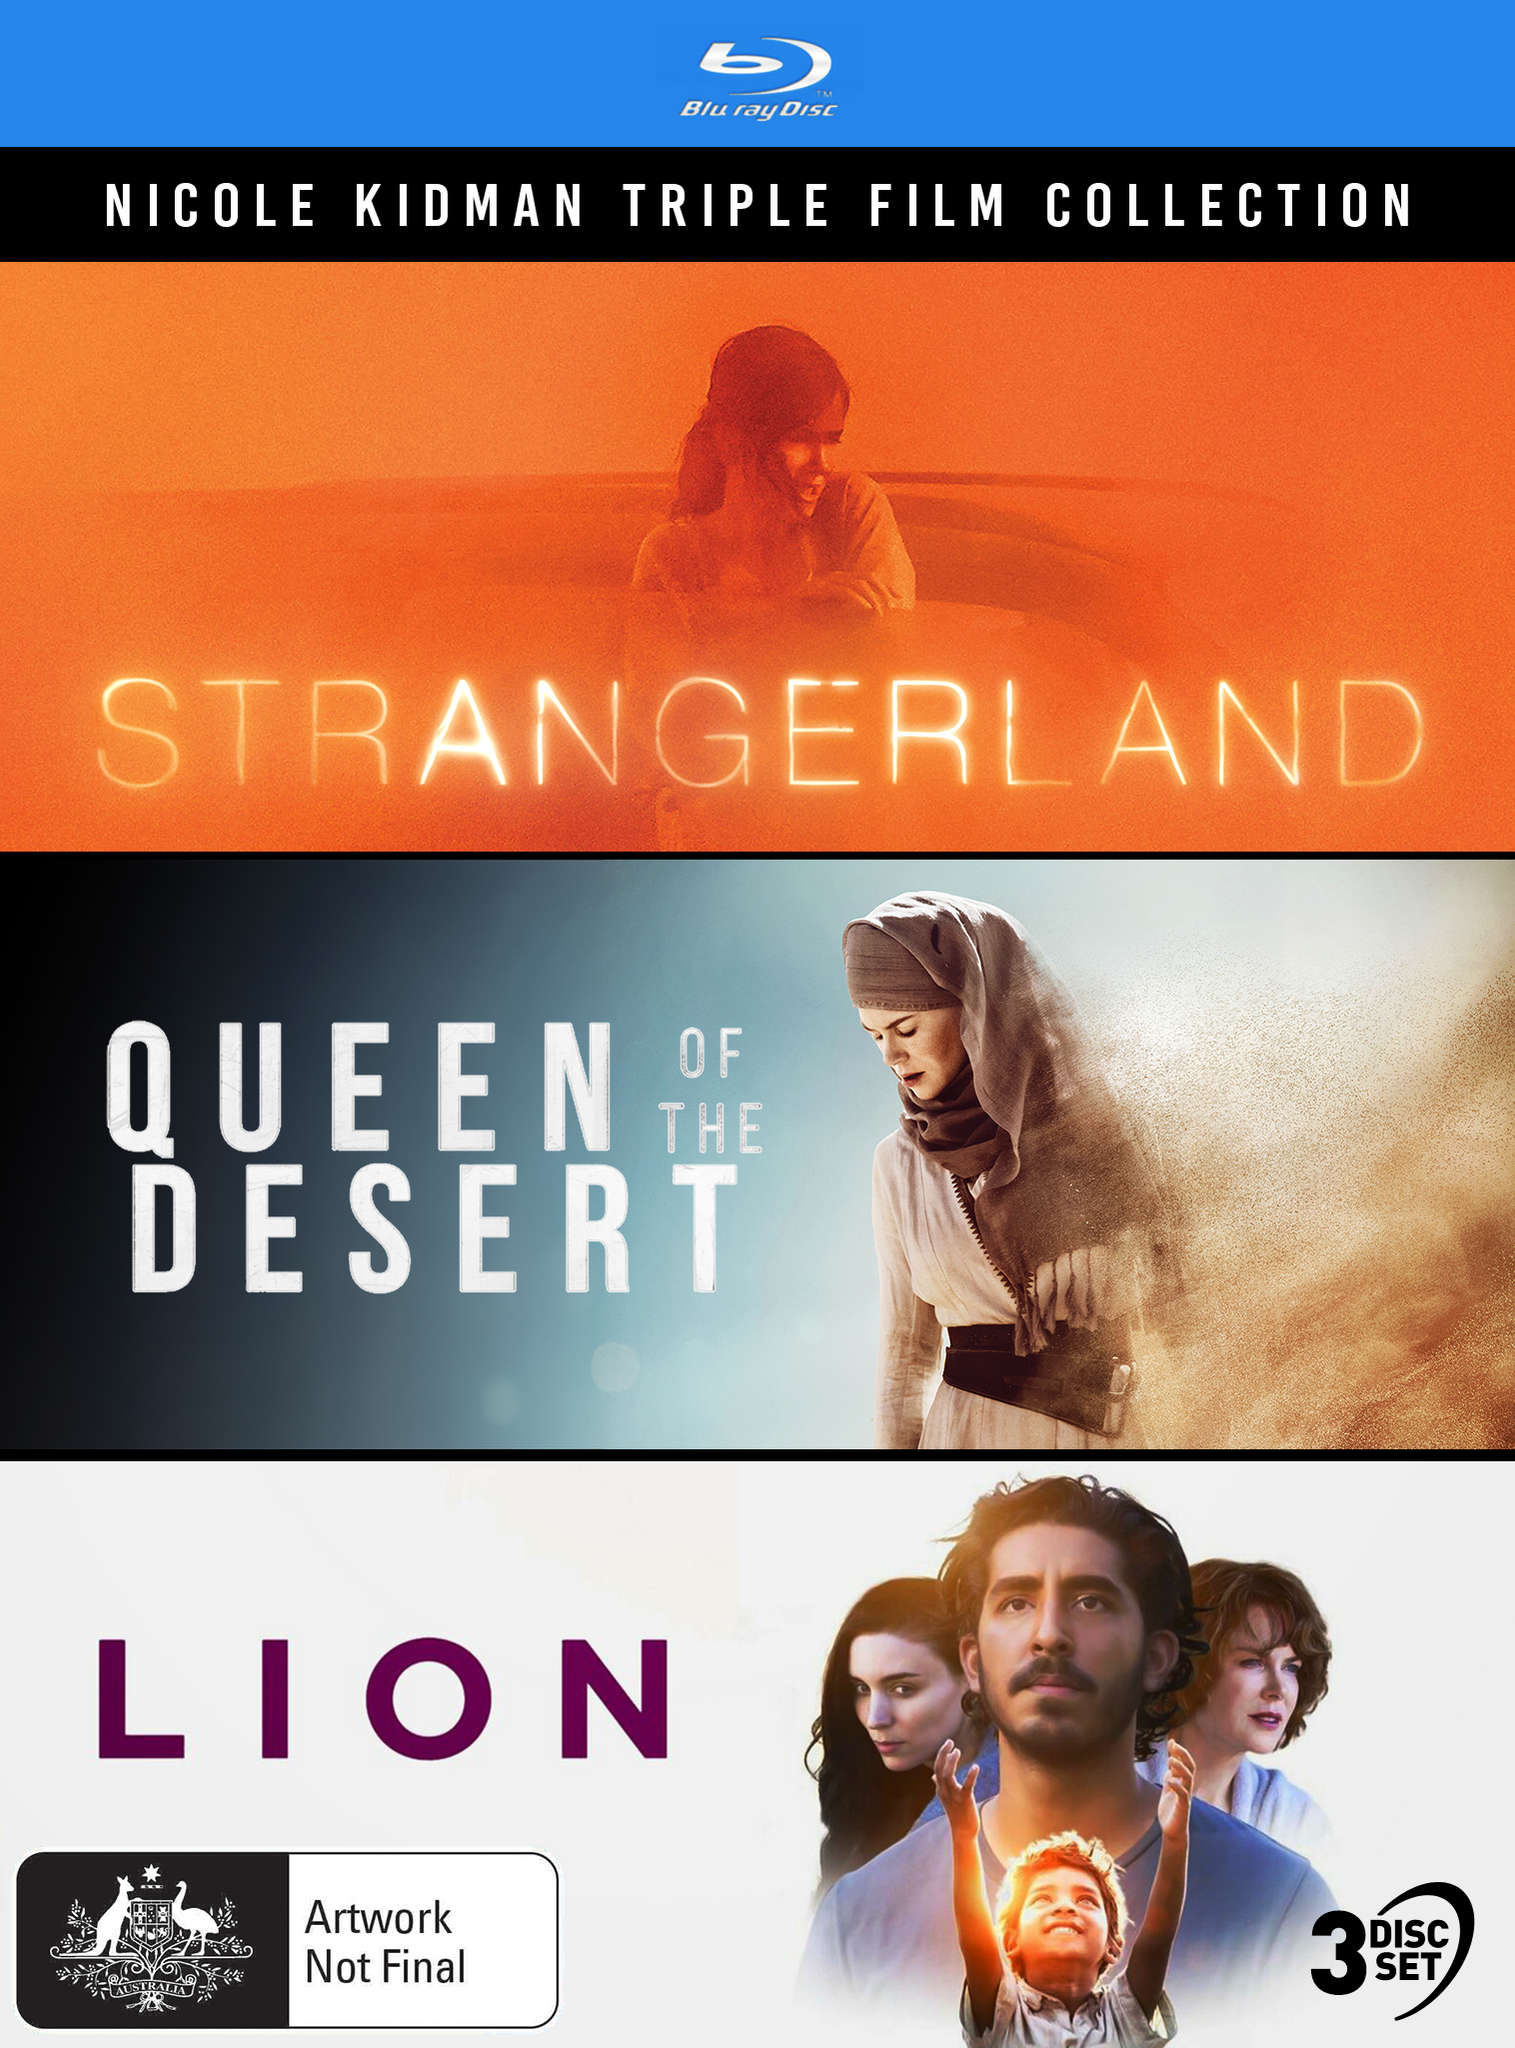 NICOLE KIDMAN: TRIPLE FILM COLLECTION (STRANGERLAND / QUEEN OF THE DESERT / LION) - SPECIAL EDITION BLU-RAY